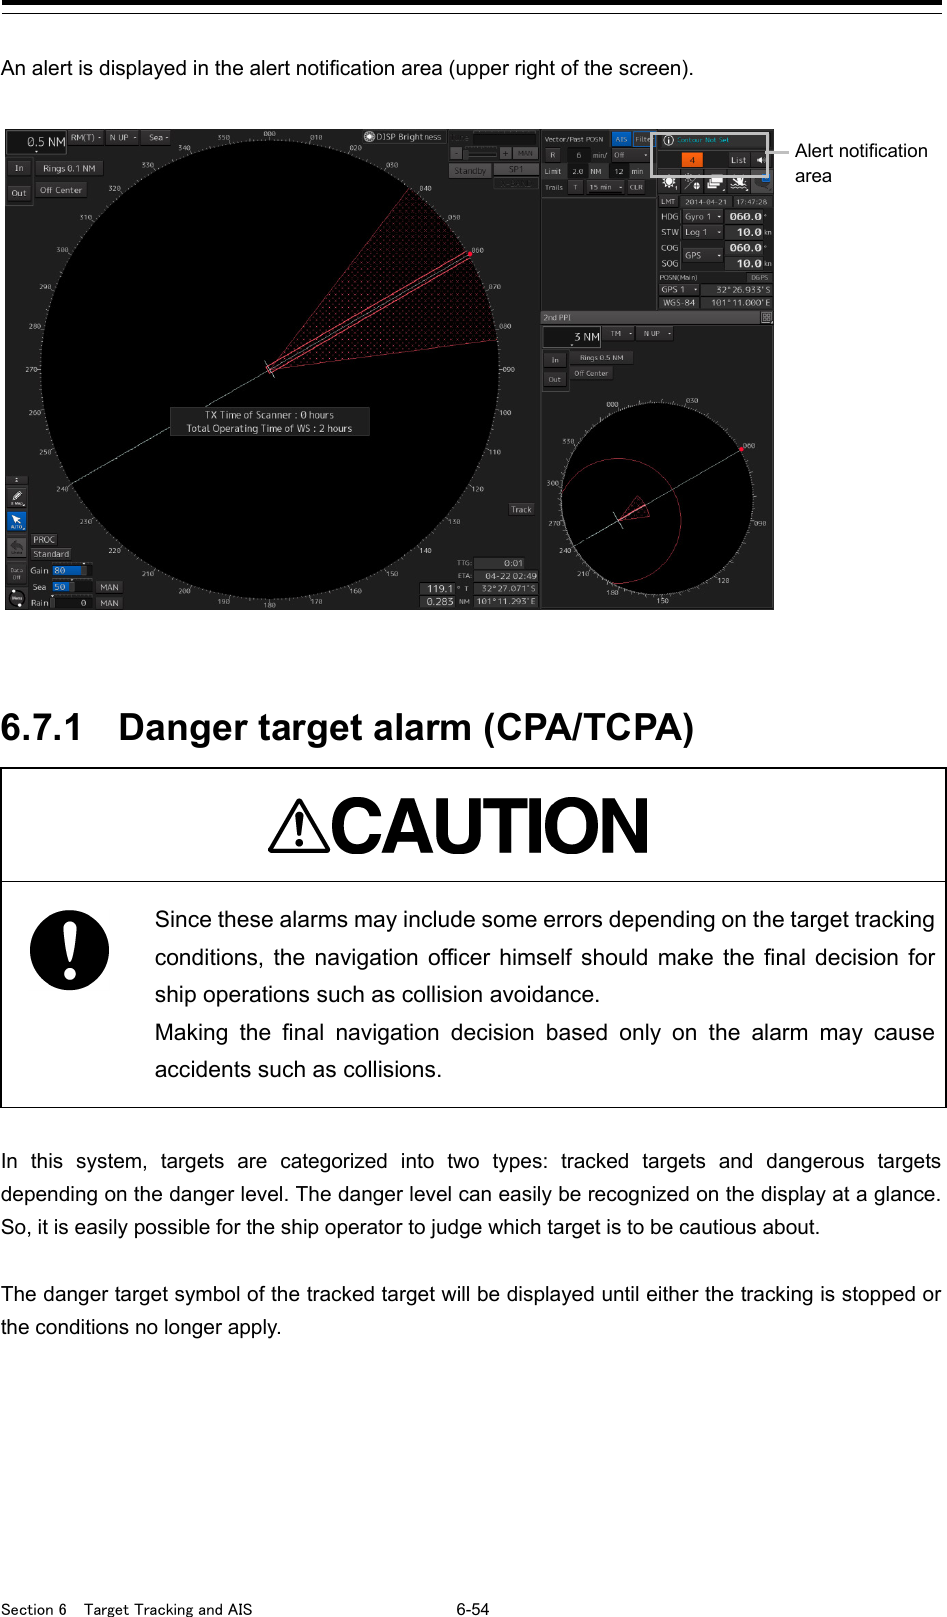  Section 6  Target Tracking and AIS 6-54  An alert is displayed in the alert notification area (upper right of the screen).      6.7.1 Danger target alarm (CPA/TCPA)   Since these alarms may include some errors depending on the target tracking conditions, the navigation officer himself should make the final decision for ship operations such as collision avoidance. Making the final navigation decision based only on the alarm may cause accidents such as collisions.  In this system, targets are categorized into two types: tracked targets and dangerous targets depending on the danger level. The danger level can easily be recognized on the display at a glance. So, it is easily possible for the ship operator to judge which target is to be cautious about.  The danger target symbol of the tracked target will be displayed until either the tracking is stopped or the conditions no longer apply.     Alert notification area 